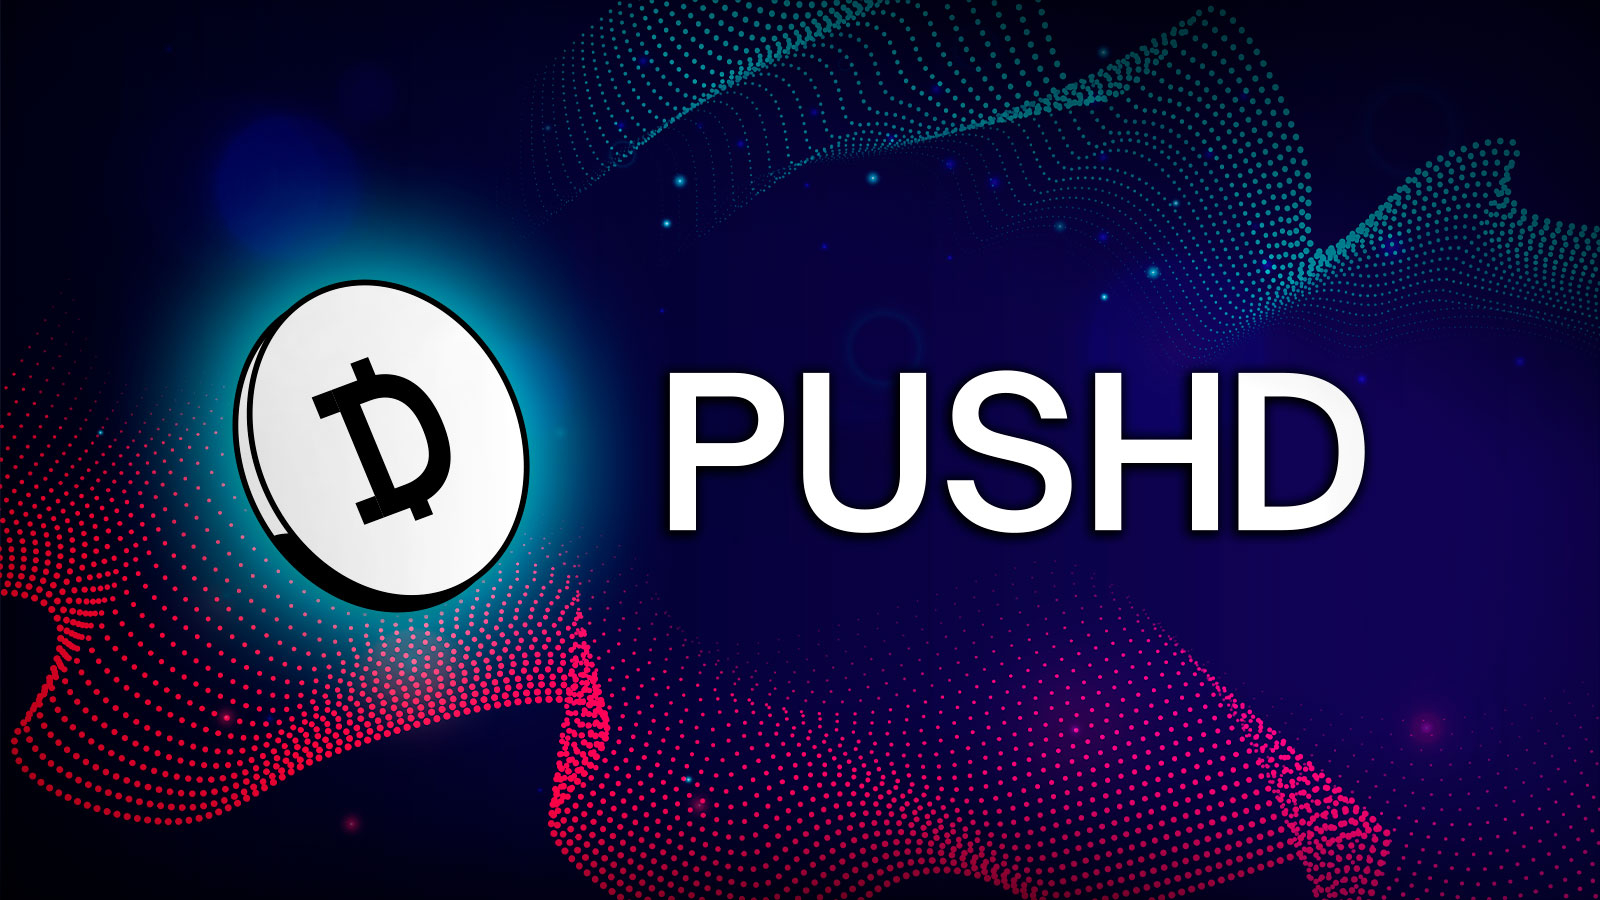 Newly launched Pushd (PUSHD) is gaining attention from the crypto community. Uniswap (UNI) and Litecoin (LTC) Are Gaining Traction